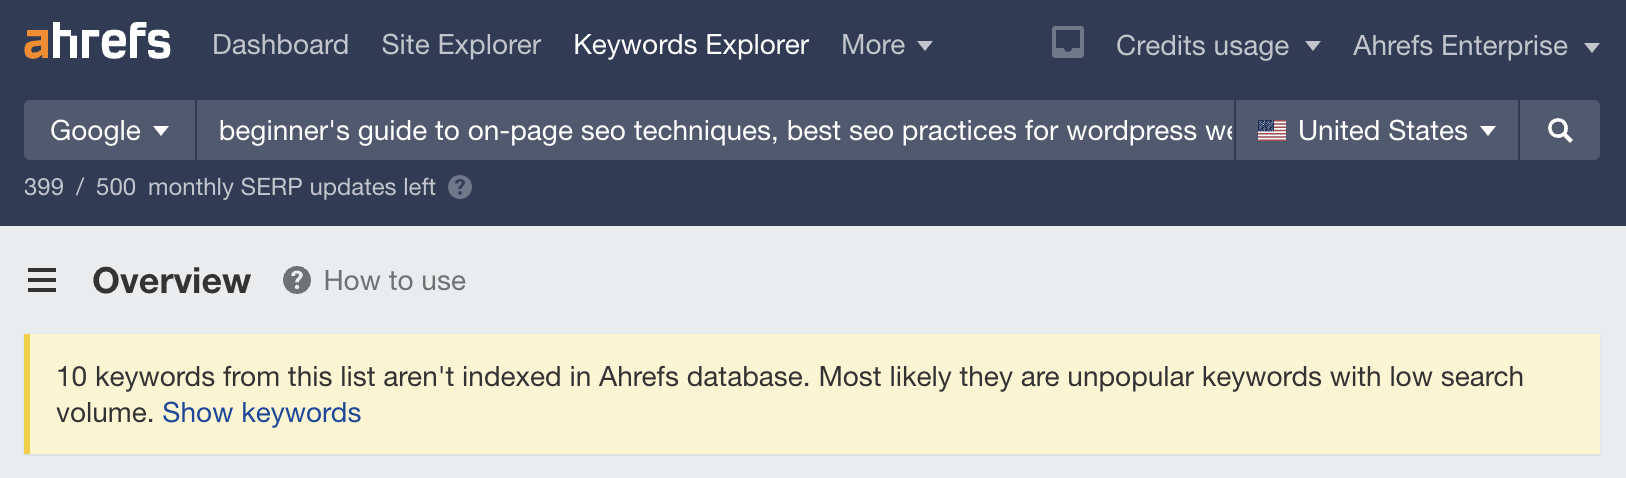 ChatGPT's long-tail keywords have no search demand